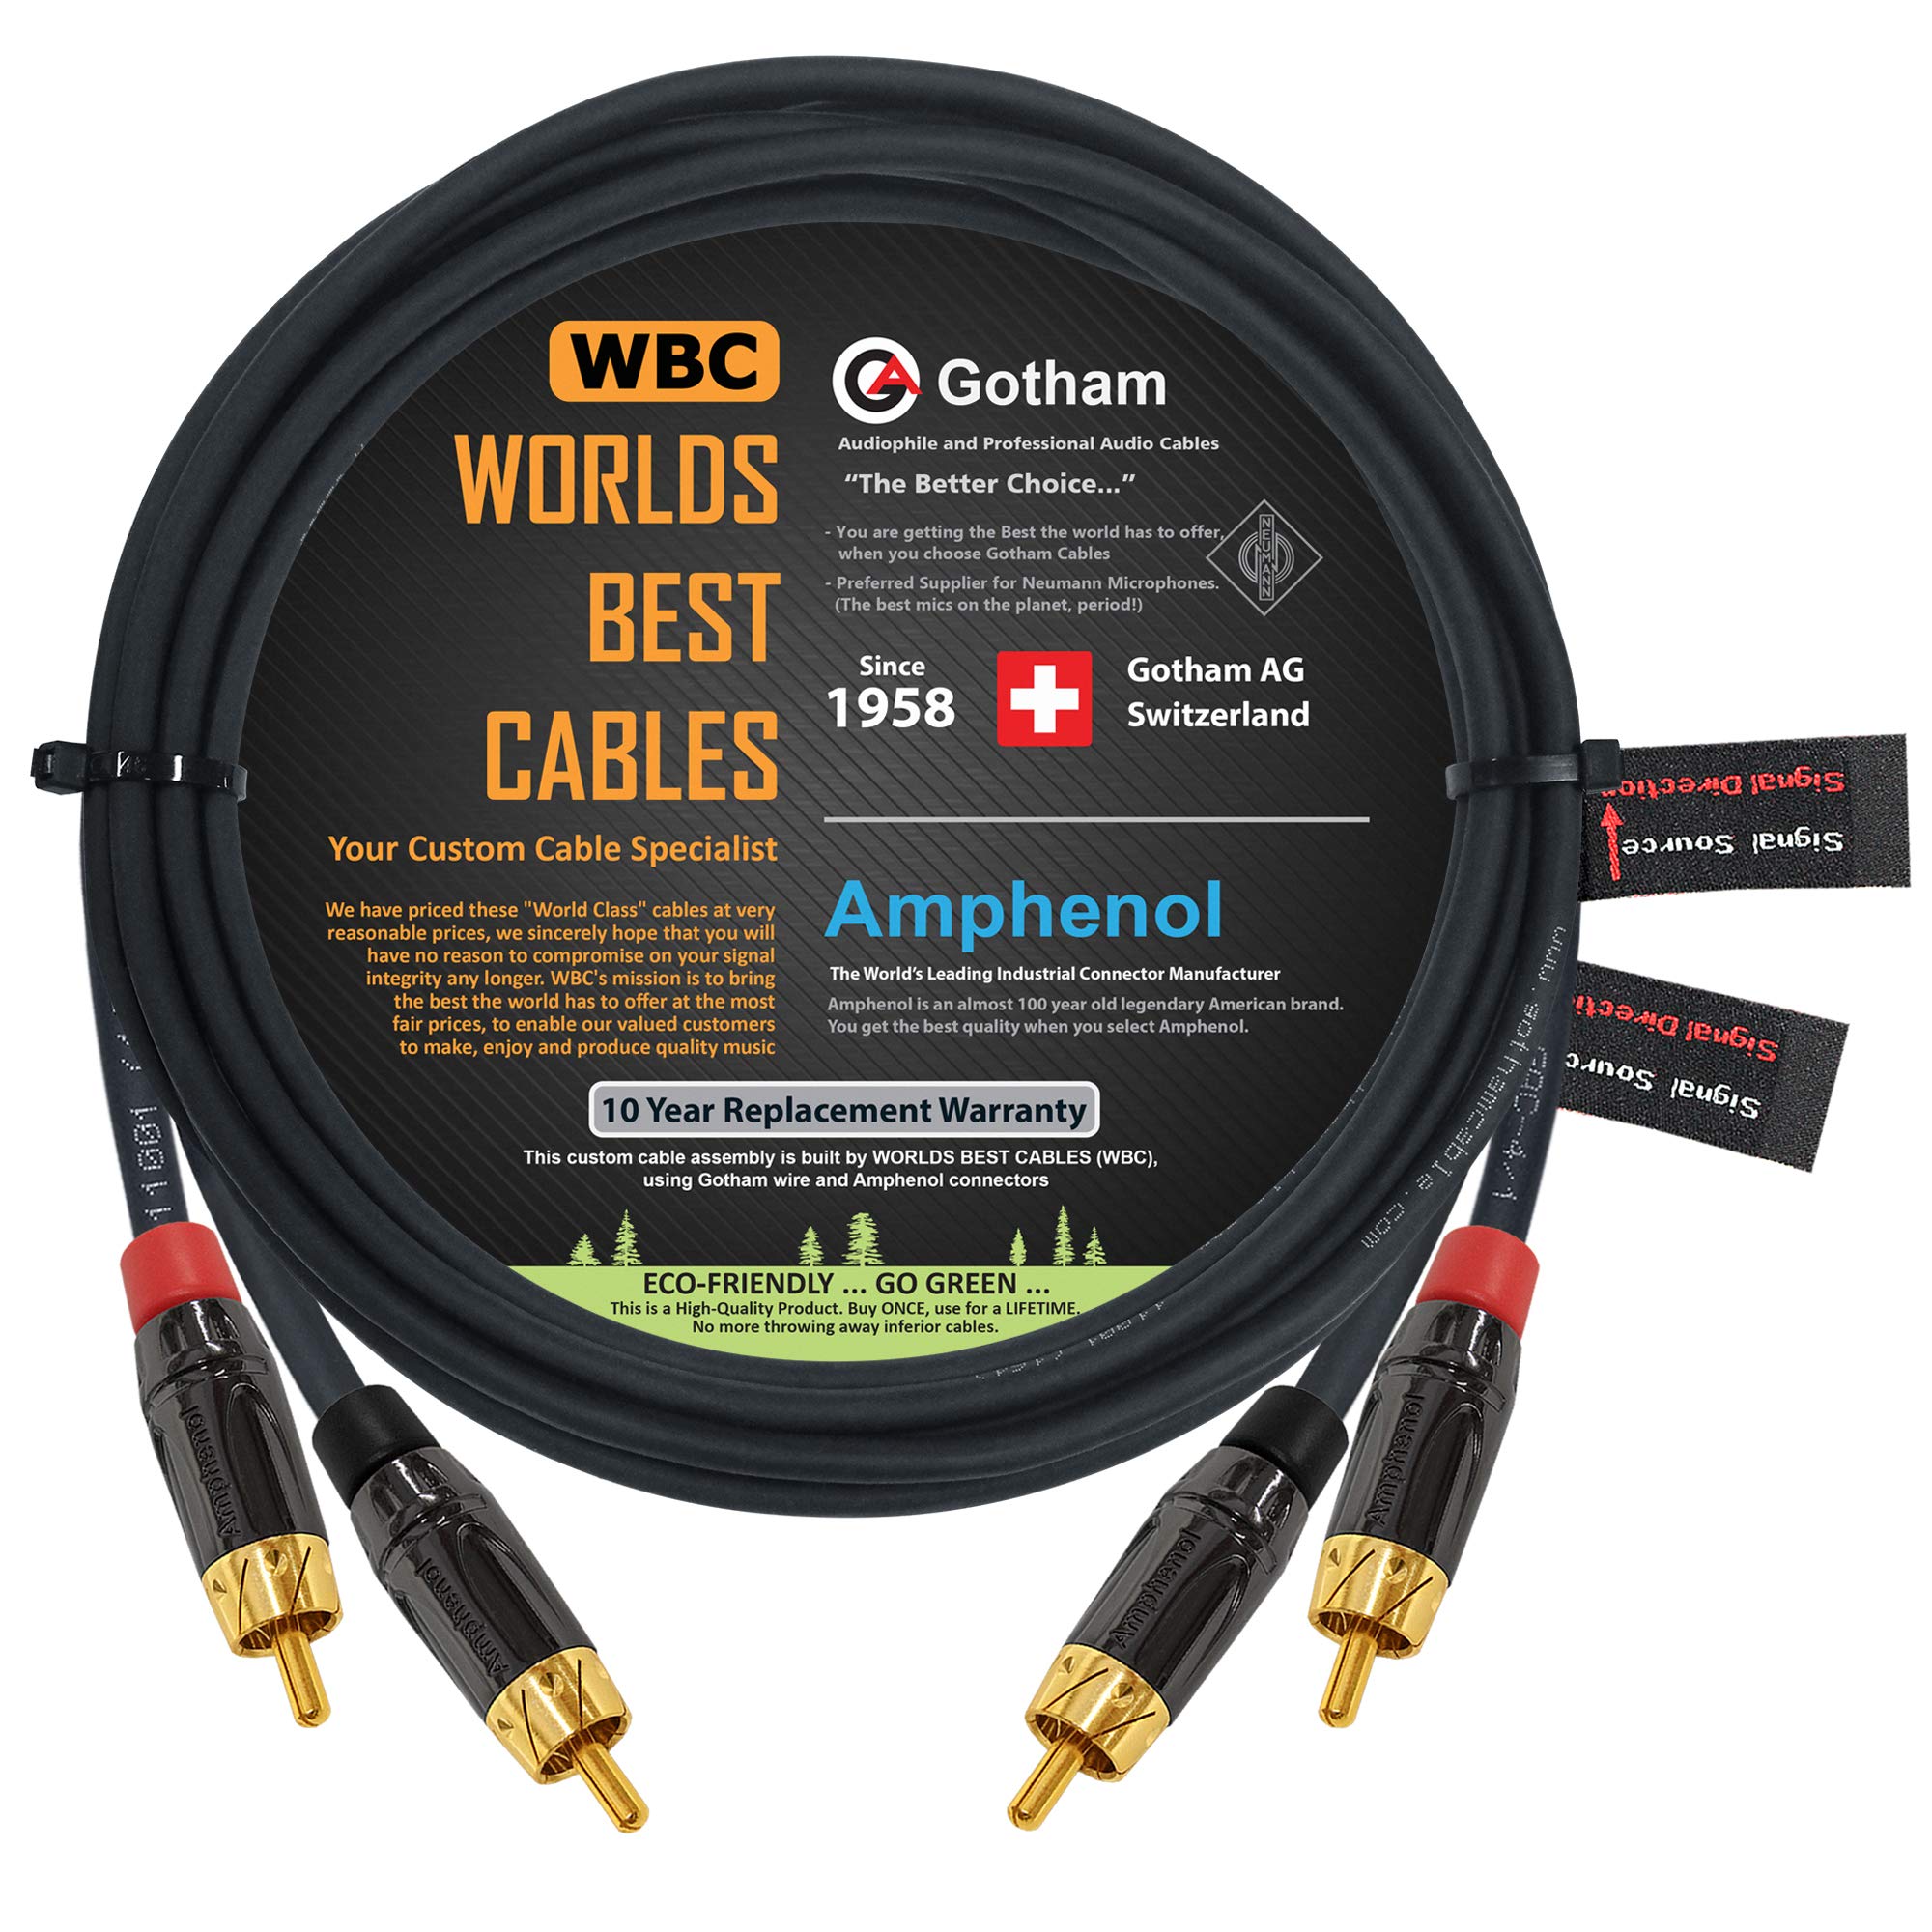 10 Foot RCA Cable Pair - Gotham GAC-4/1 (Black) Star-Quad Audio Interconnect Cable with Amphenol ACPL Black Chrome Body, Gold Plated RCA Connectors...